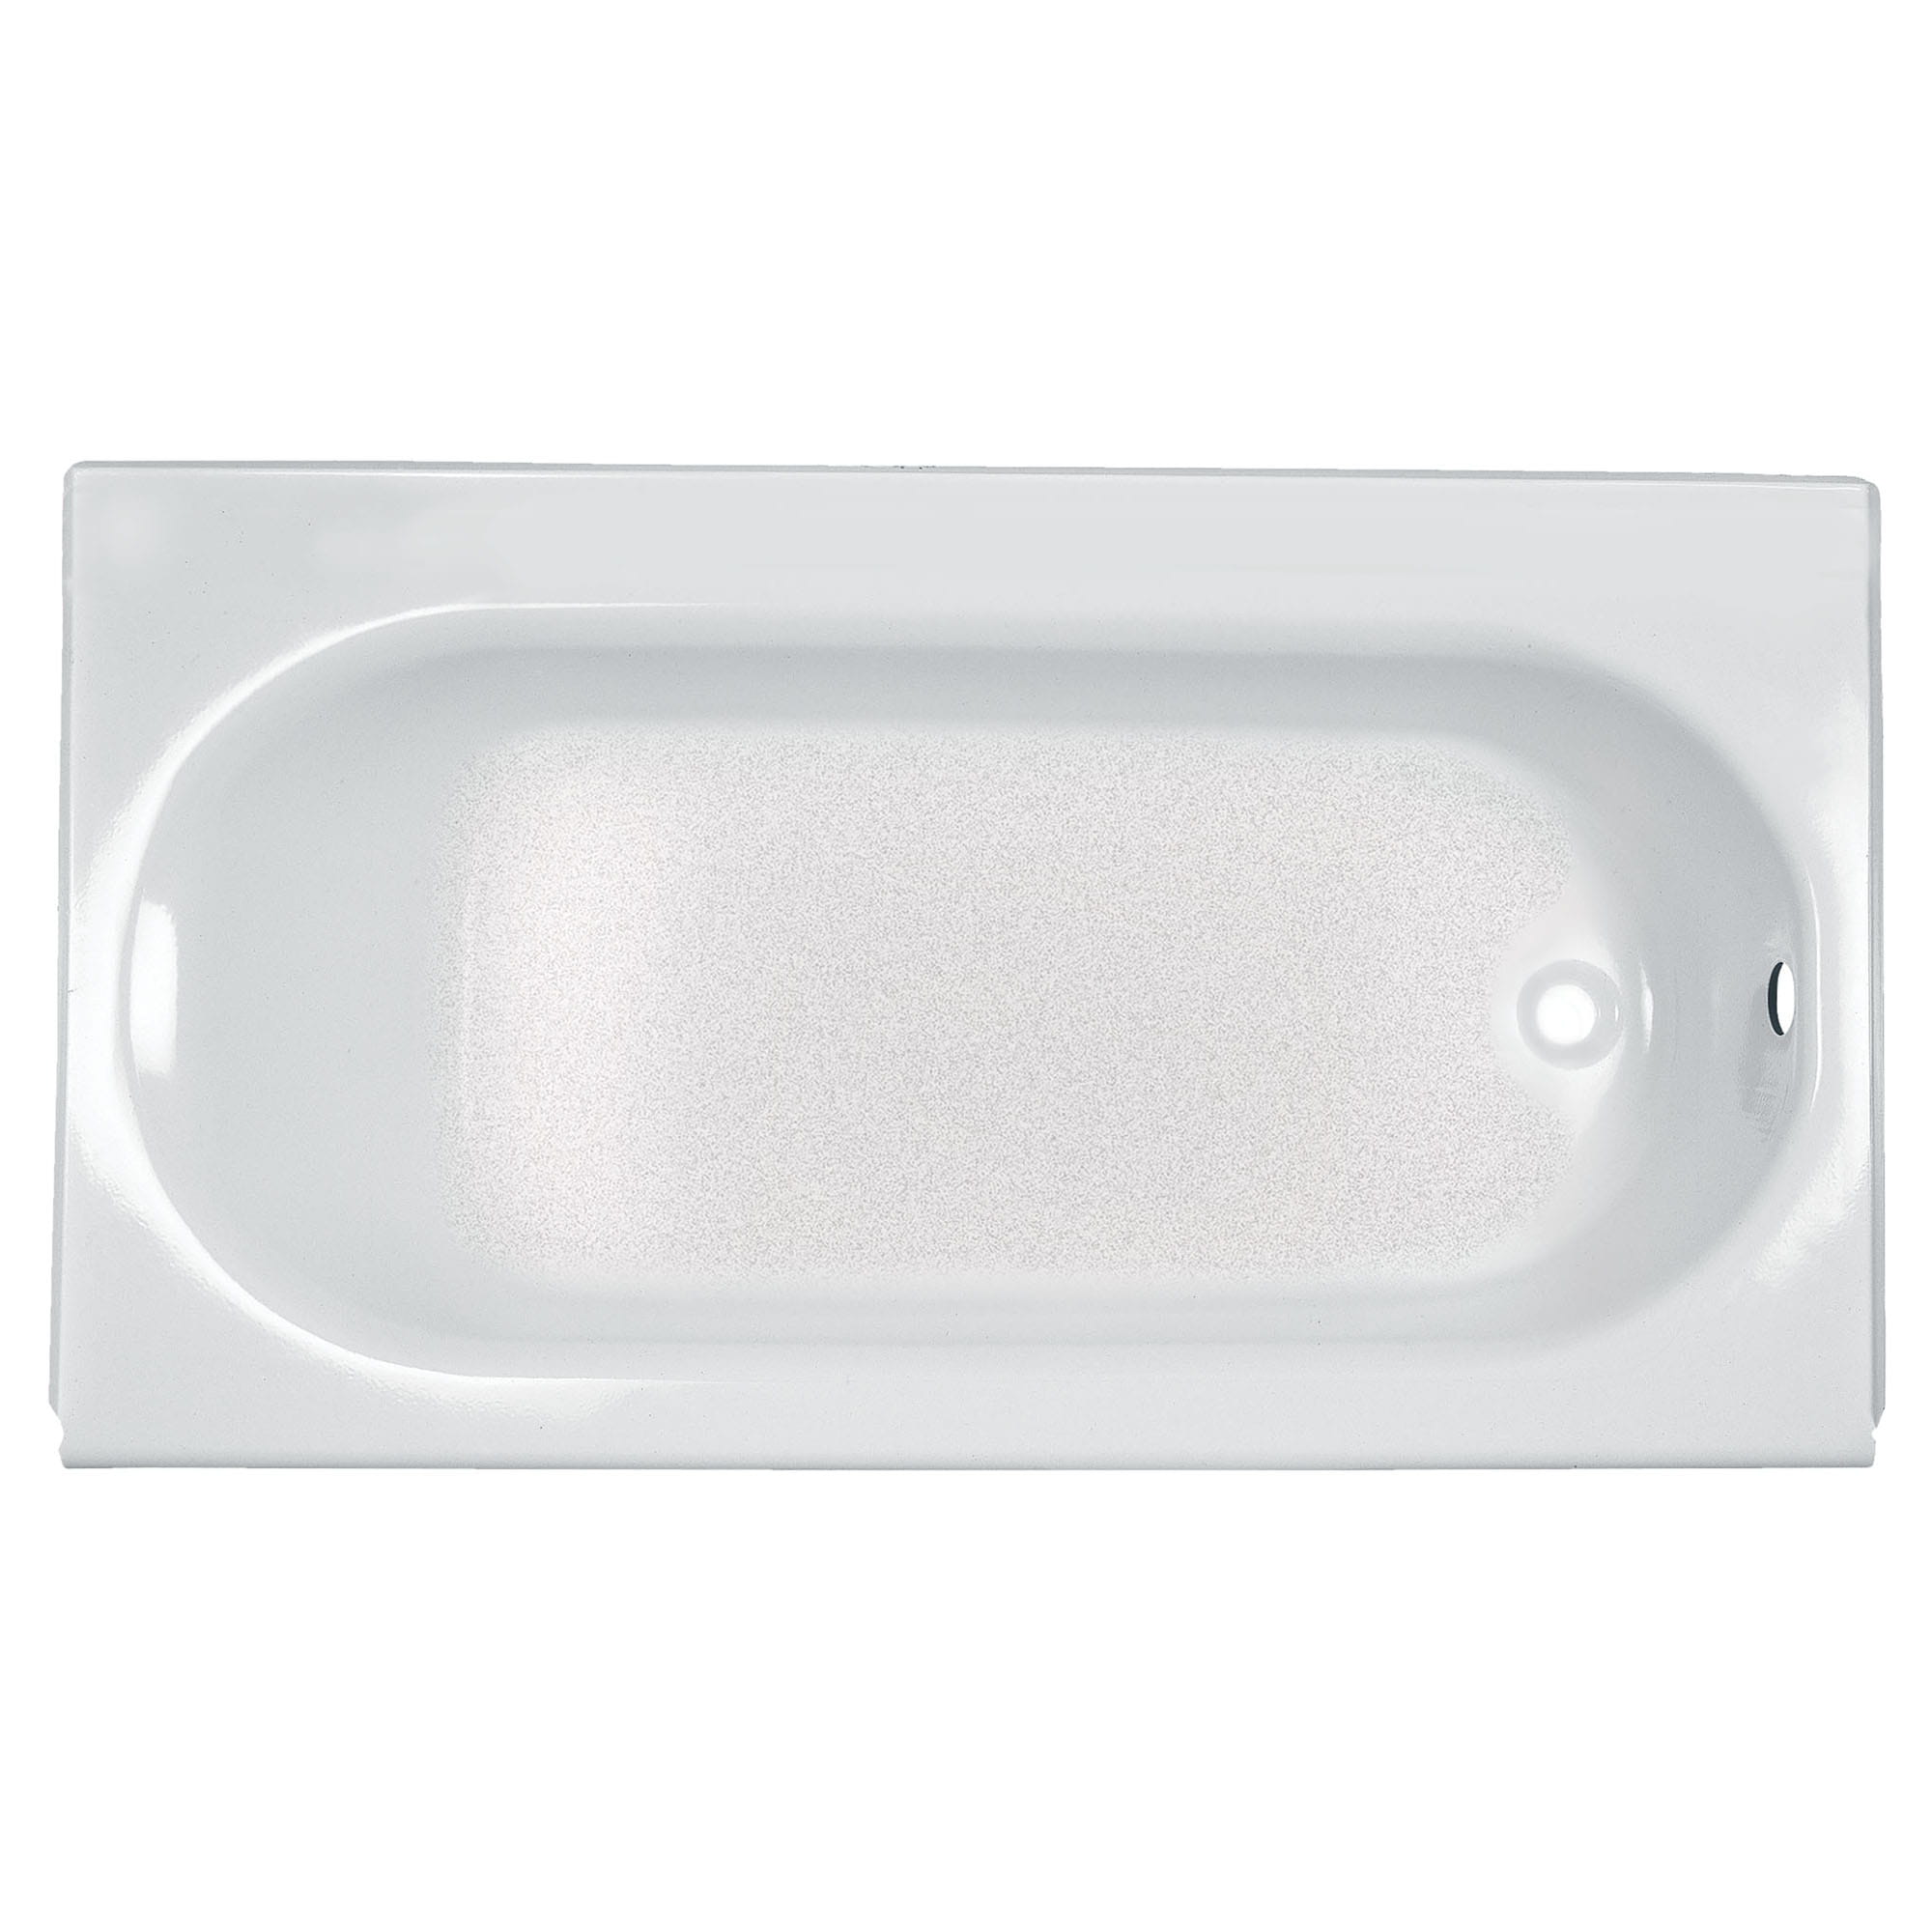 Princeton Americast 60 x 34 Inch Integral Apron Bathtub Above Floor Rough Right Hand Outlet with Luxury Ledge WHITE